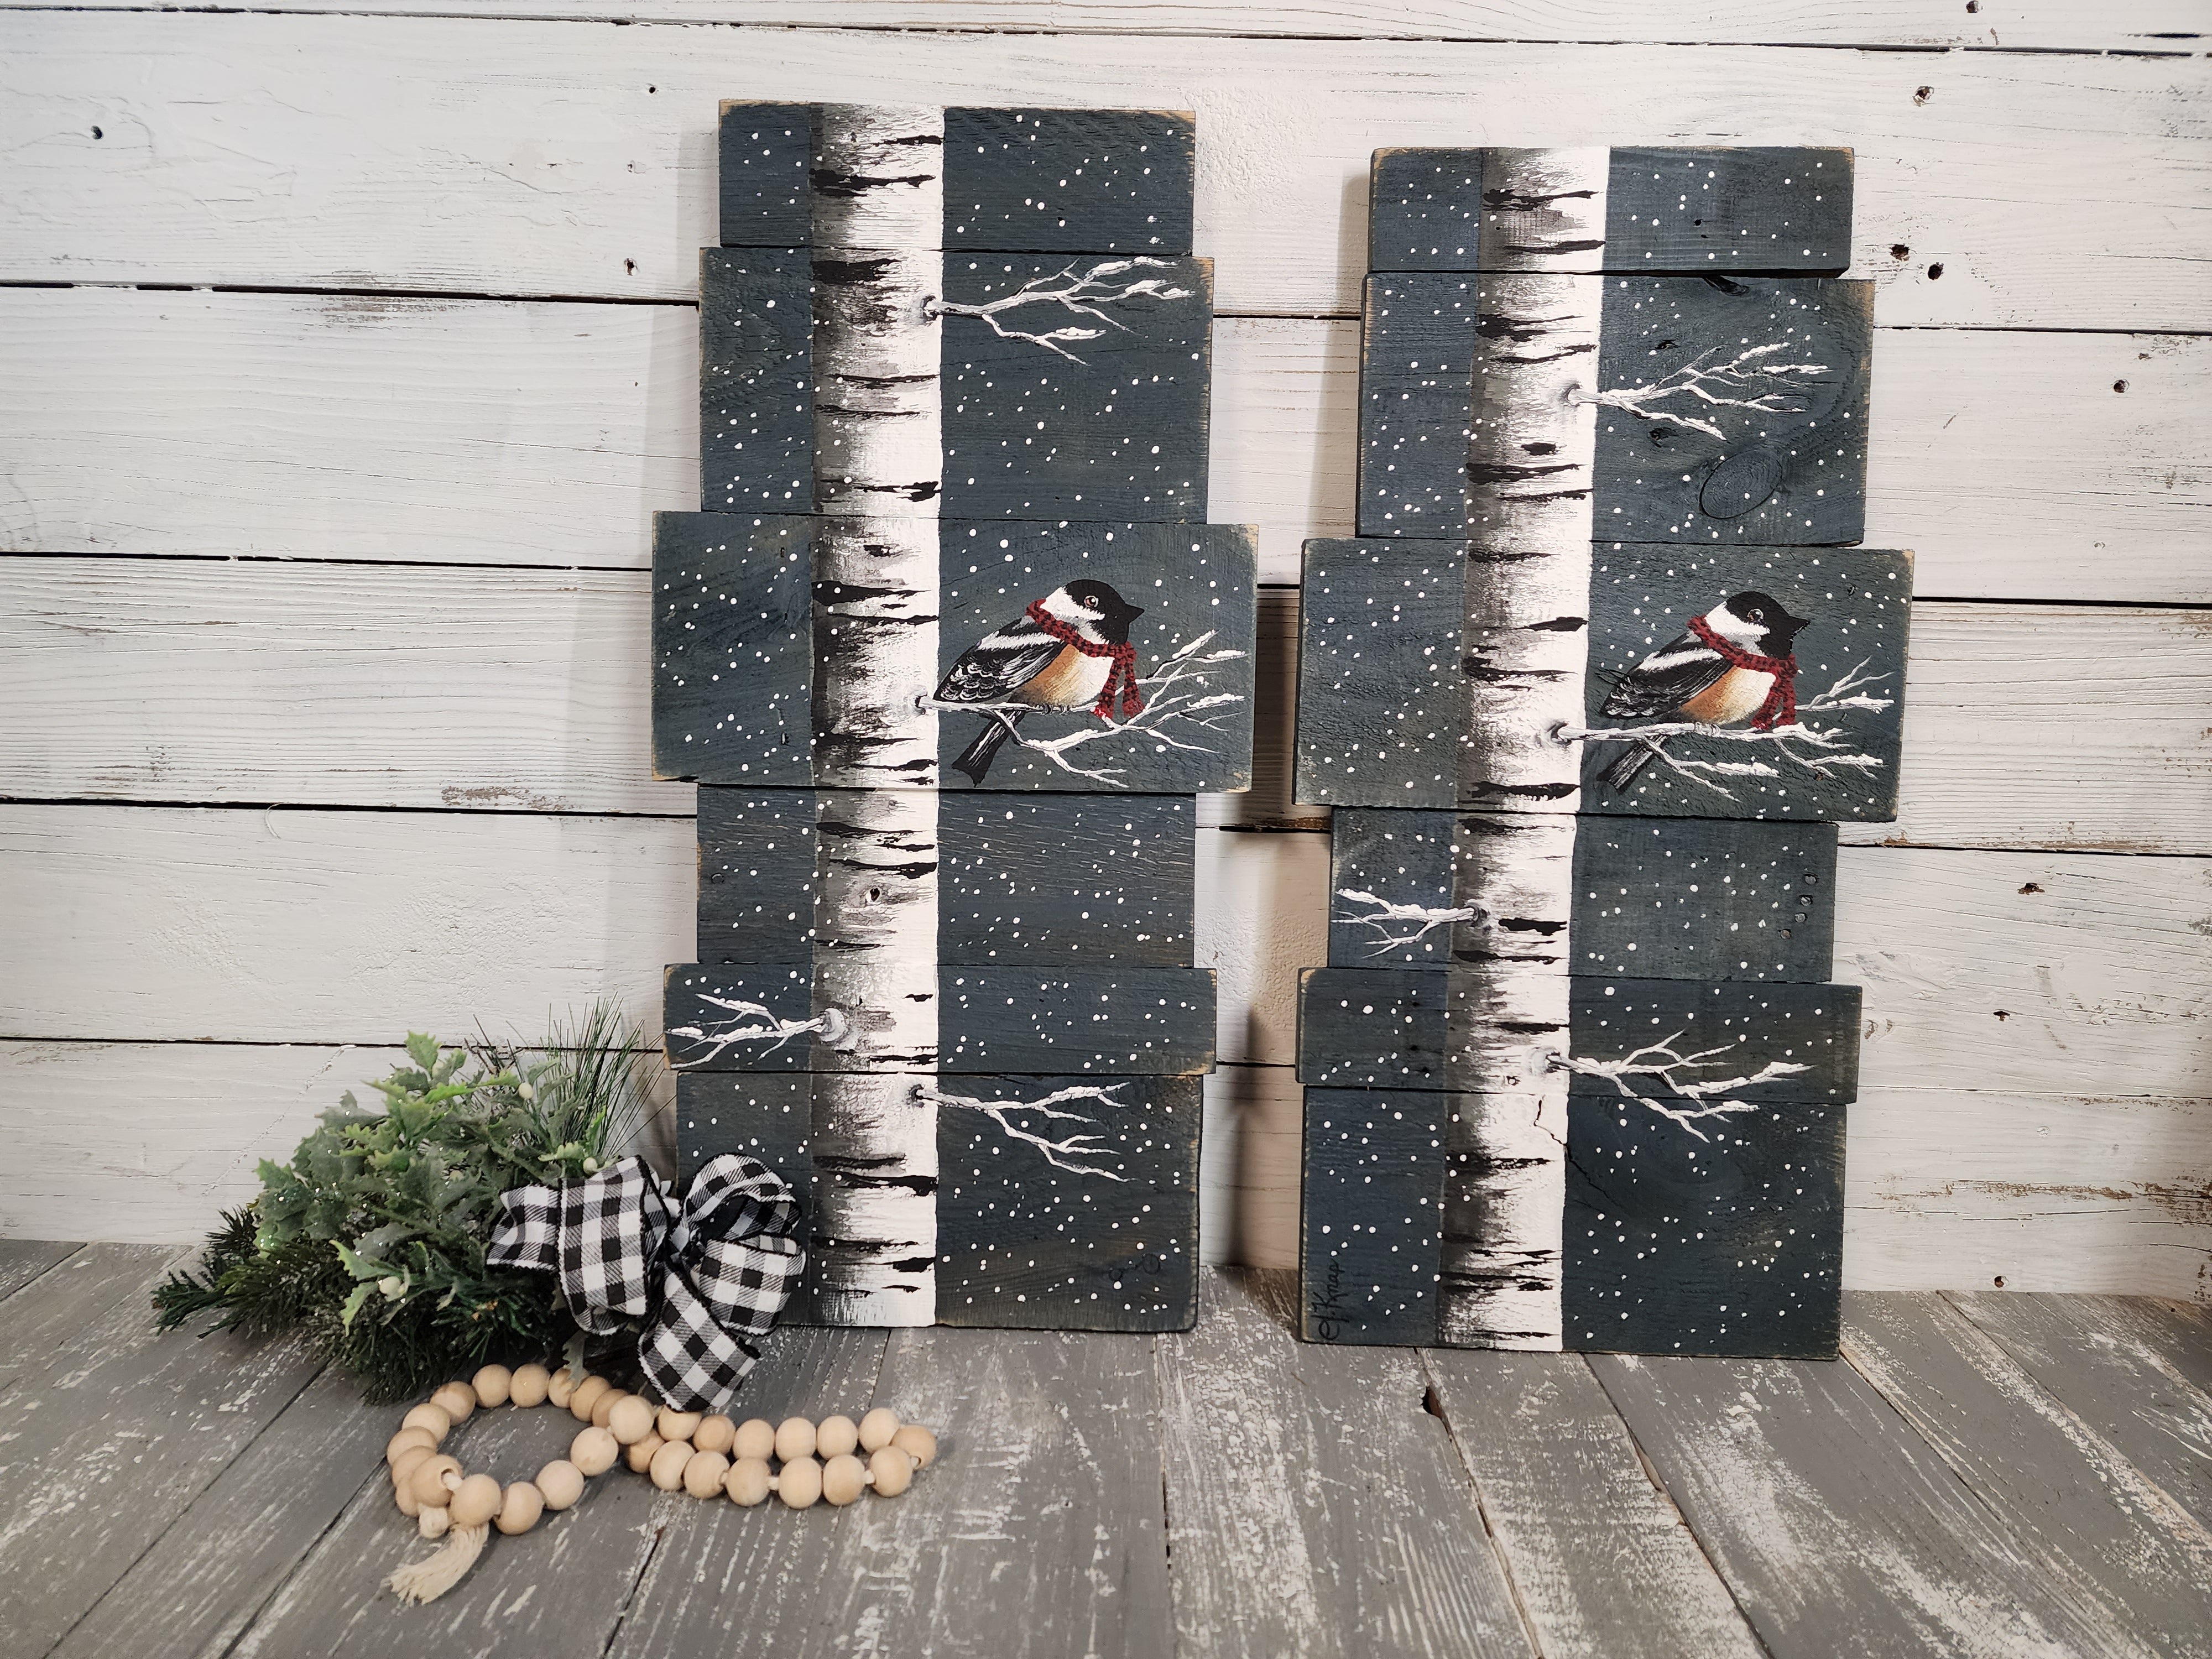 Bird With Red Plaid Scarf on White Birch Tree, Hand Painted Christmas Decor on Pallet Wood